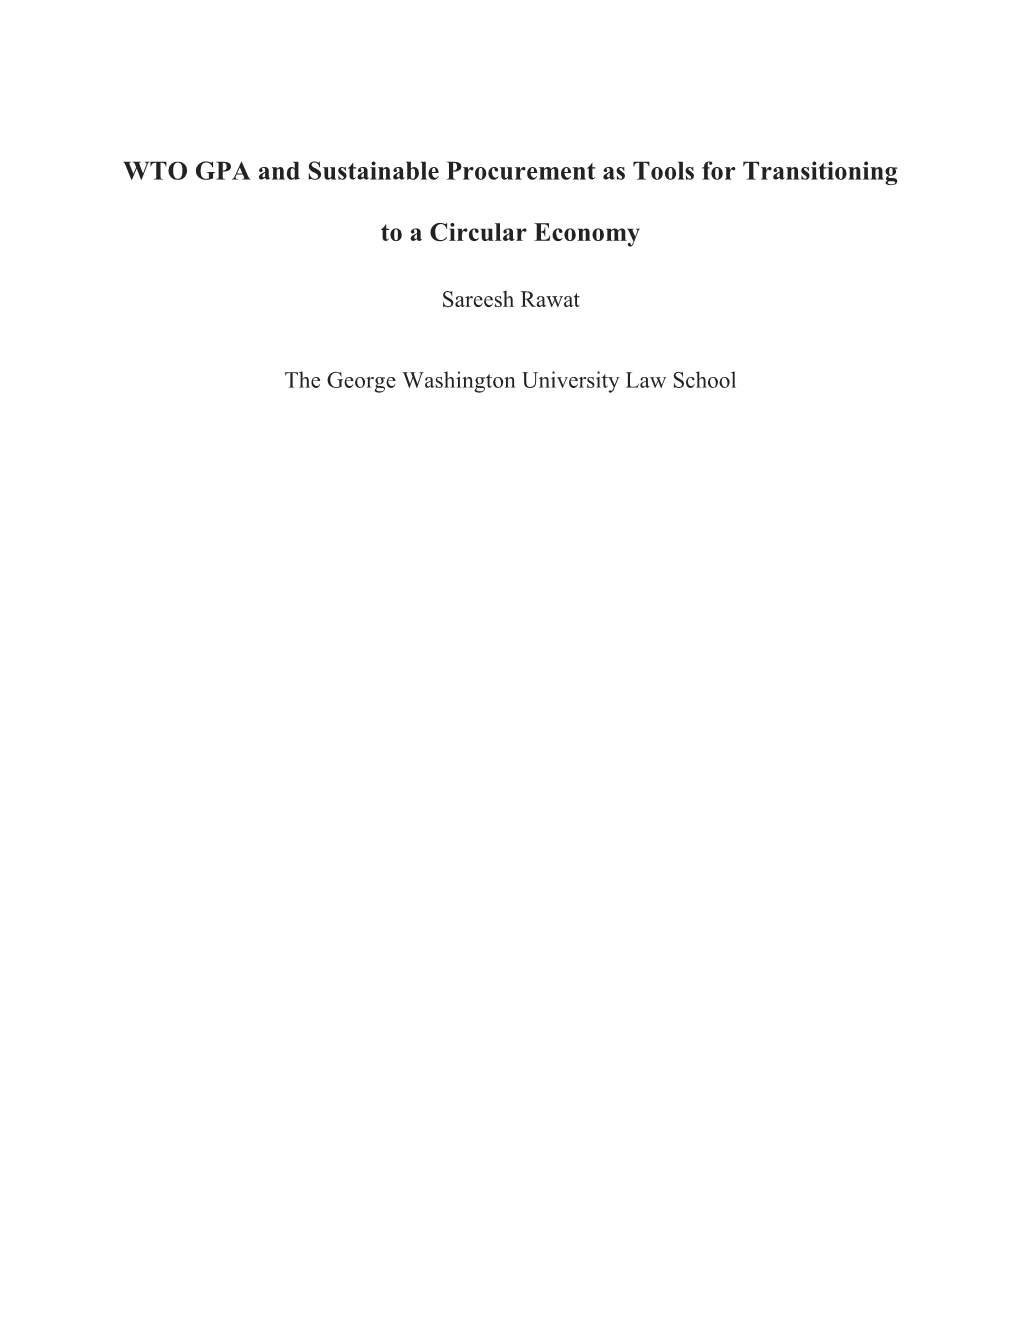 WTO GPA and Sustainable Procurement As Tools for Transitioning